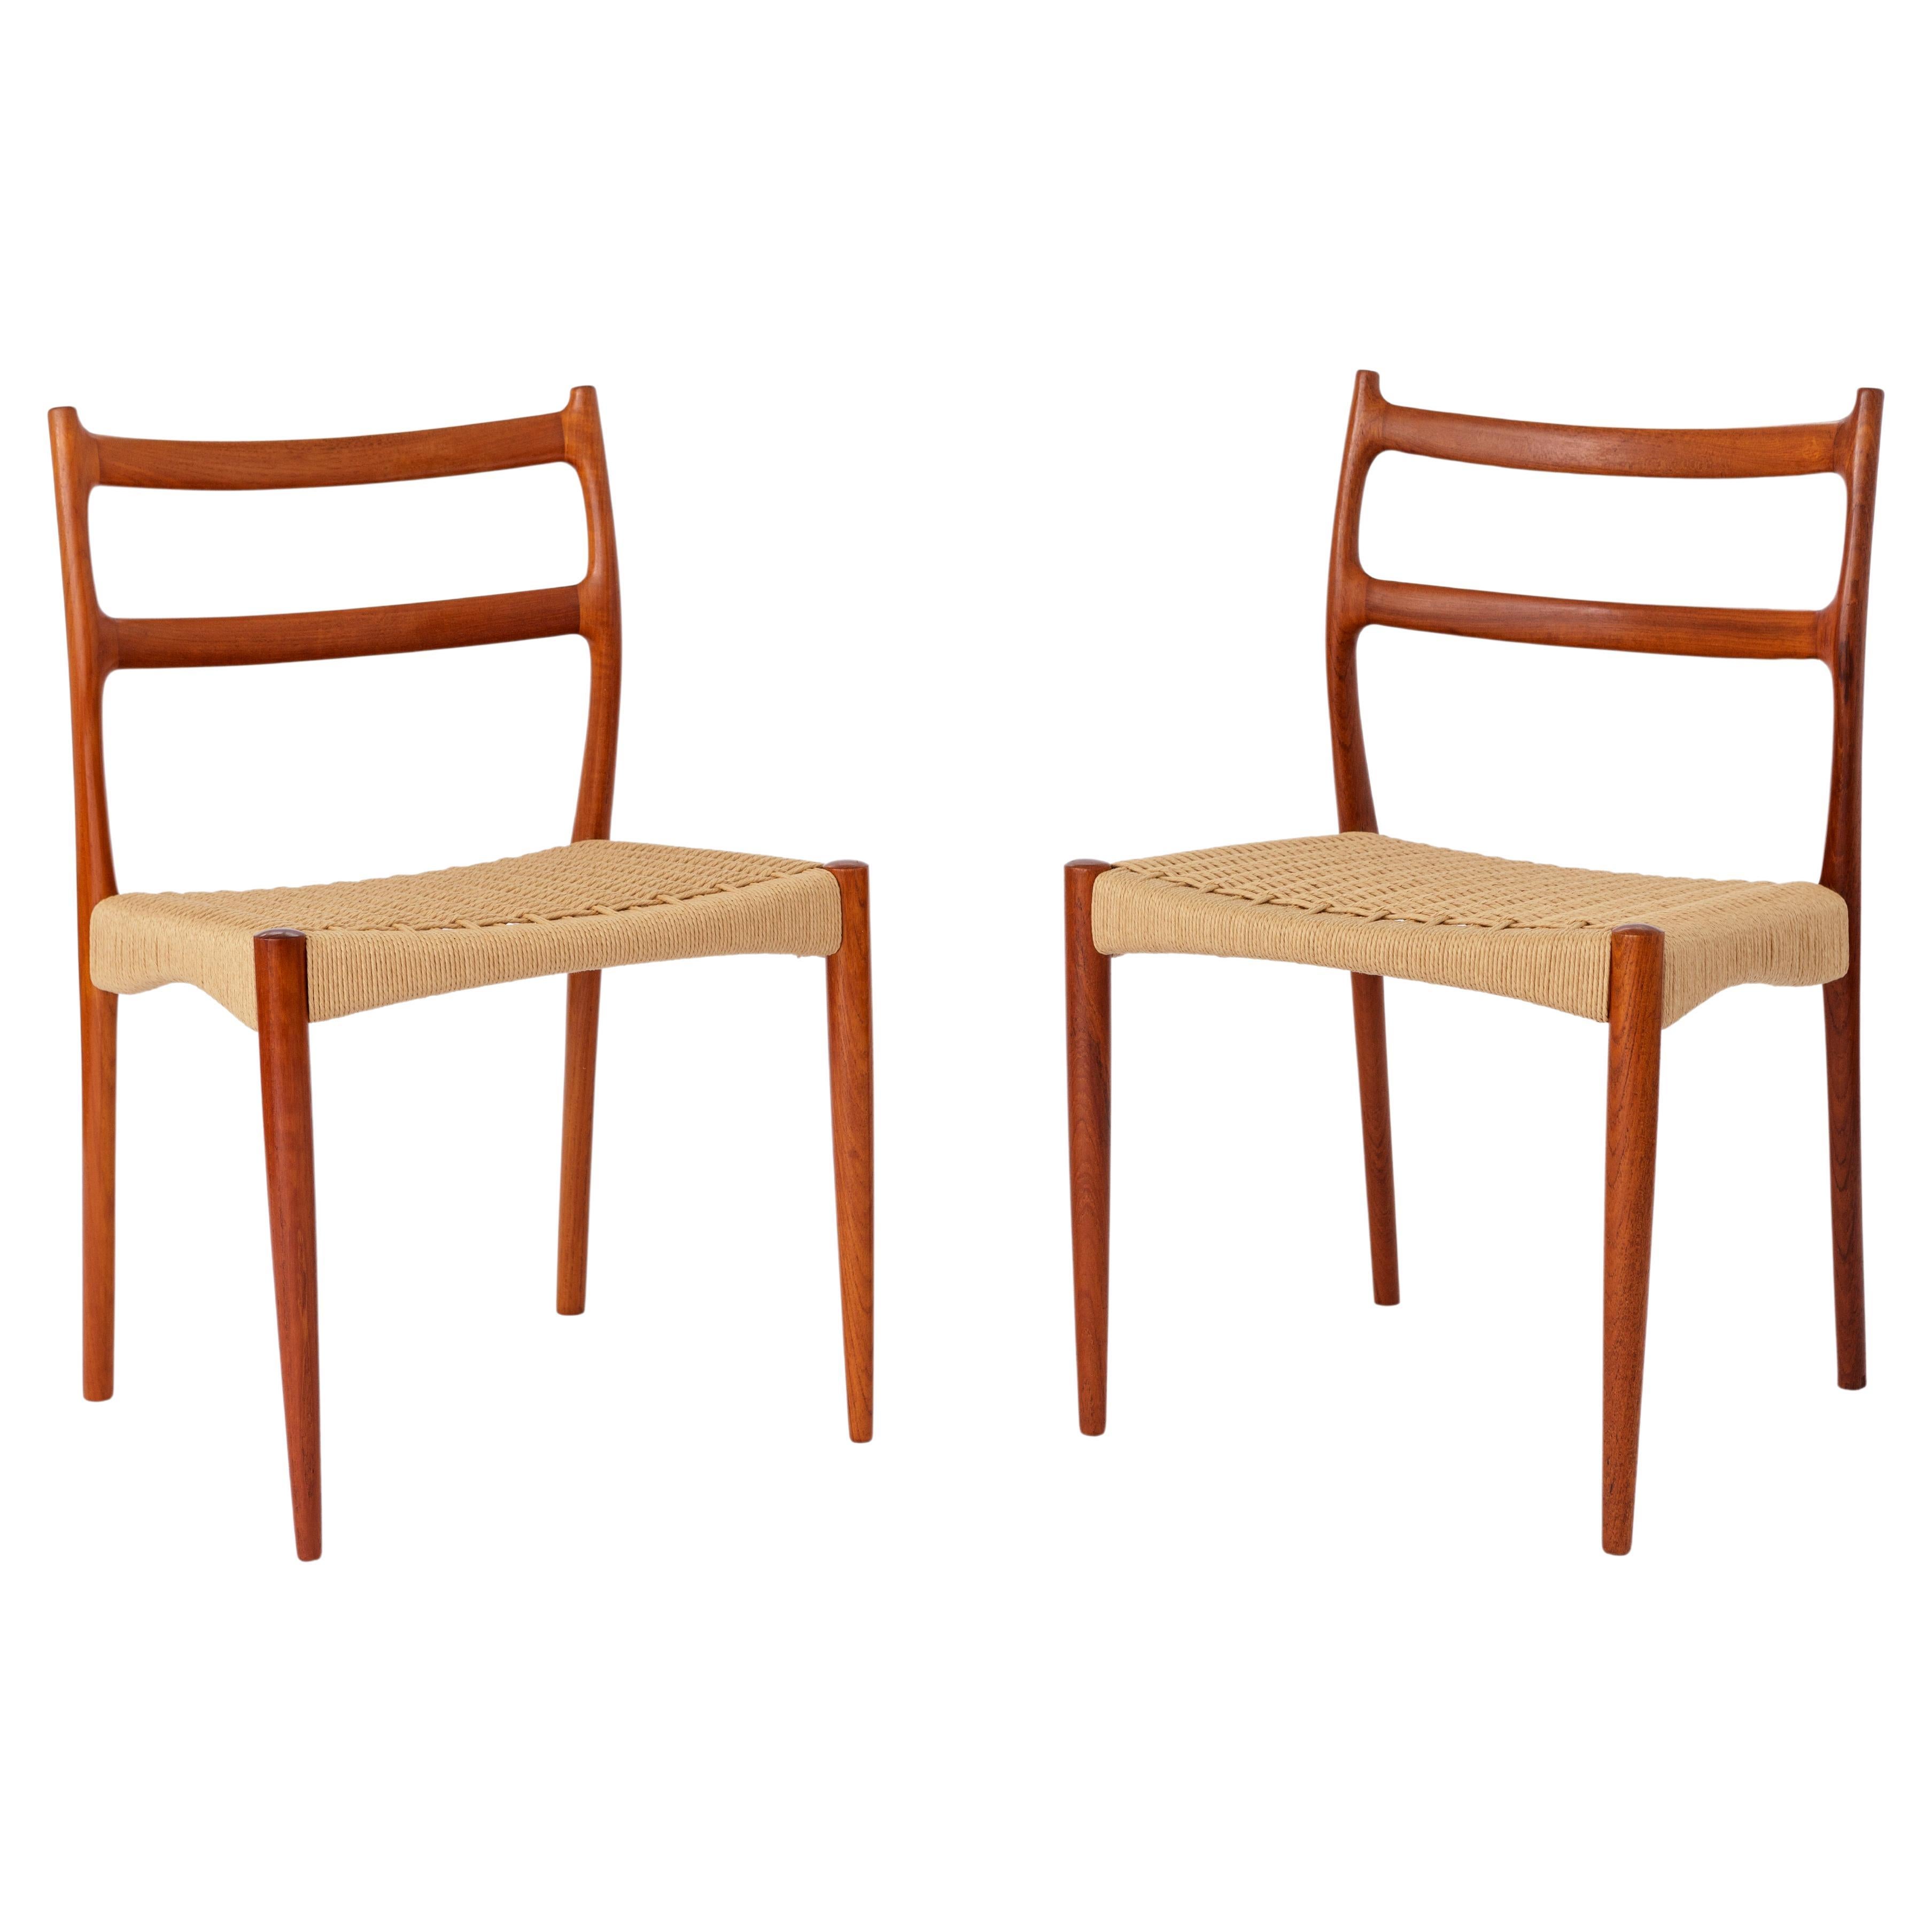 2 Søren Ladefoged chairs, teak, 1960s, papercord seat, dining chairs, set of 2 For Sale